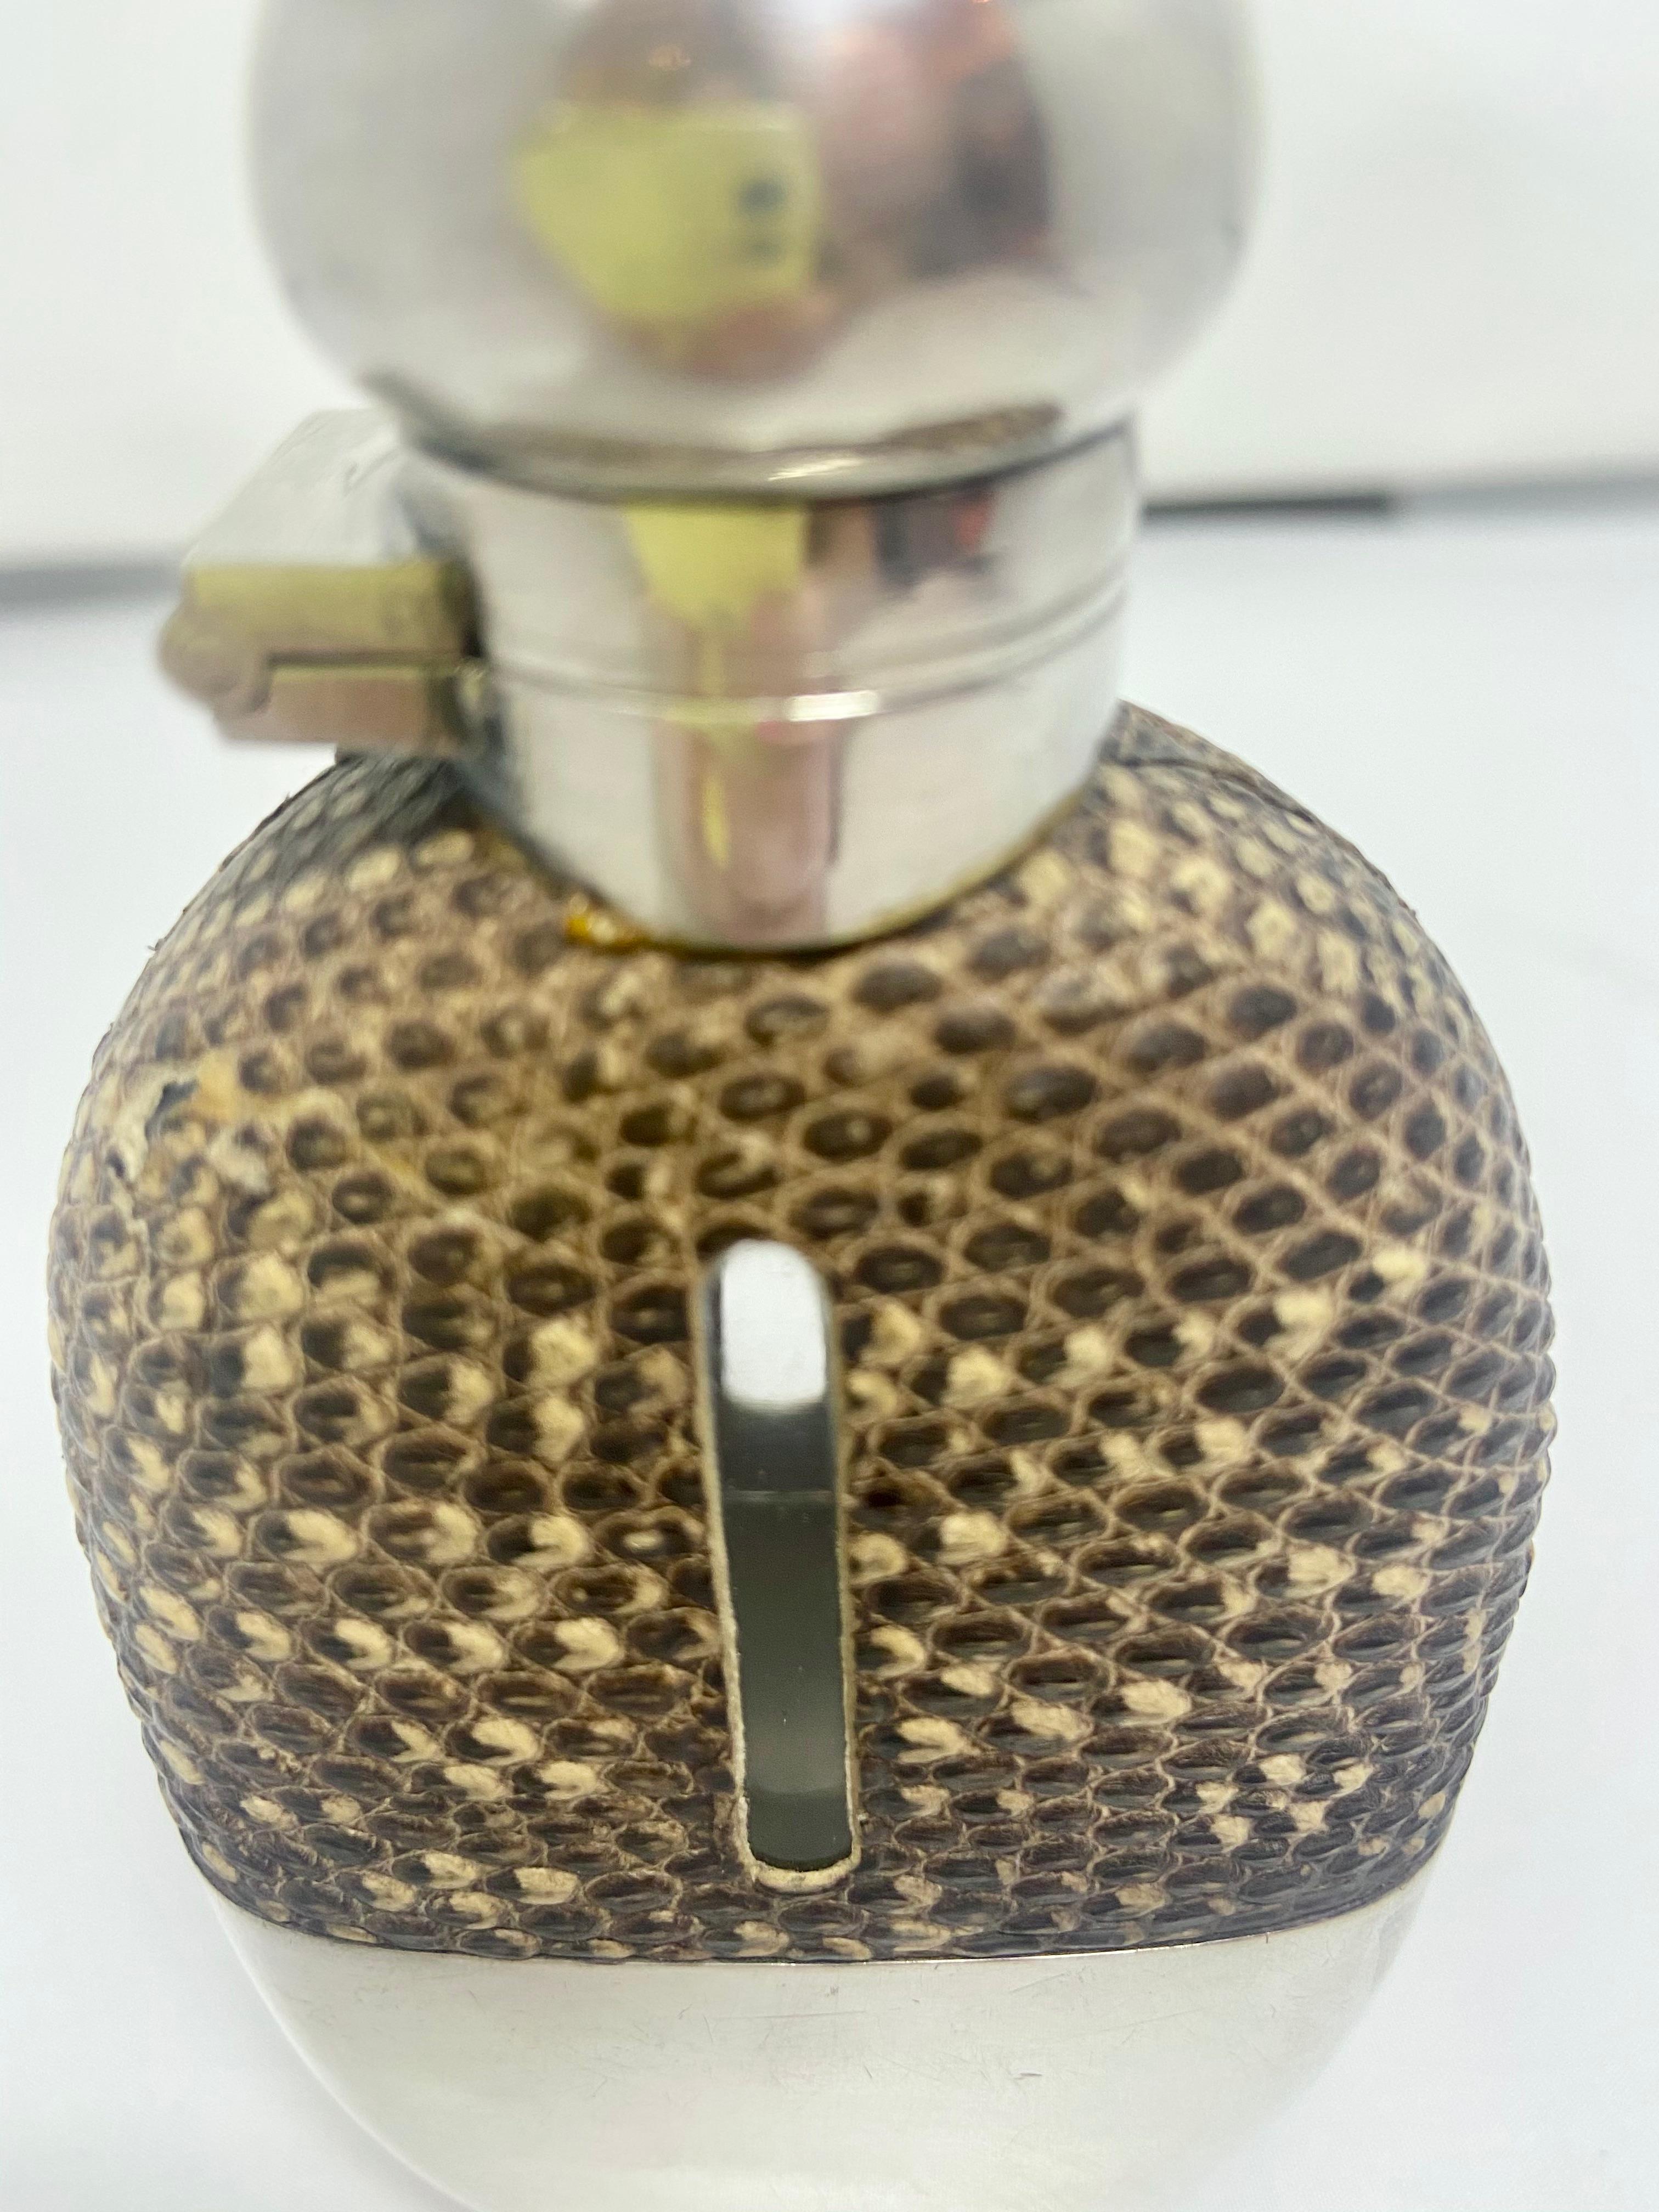 20th Century Antique English Silver-Plate and Snakeskin Hip Flask, Circa 1900